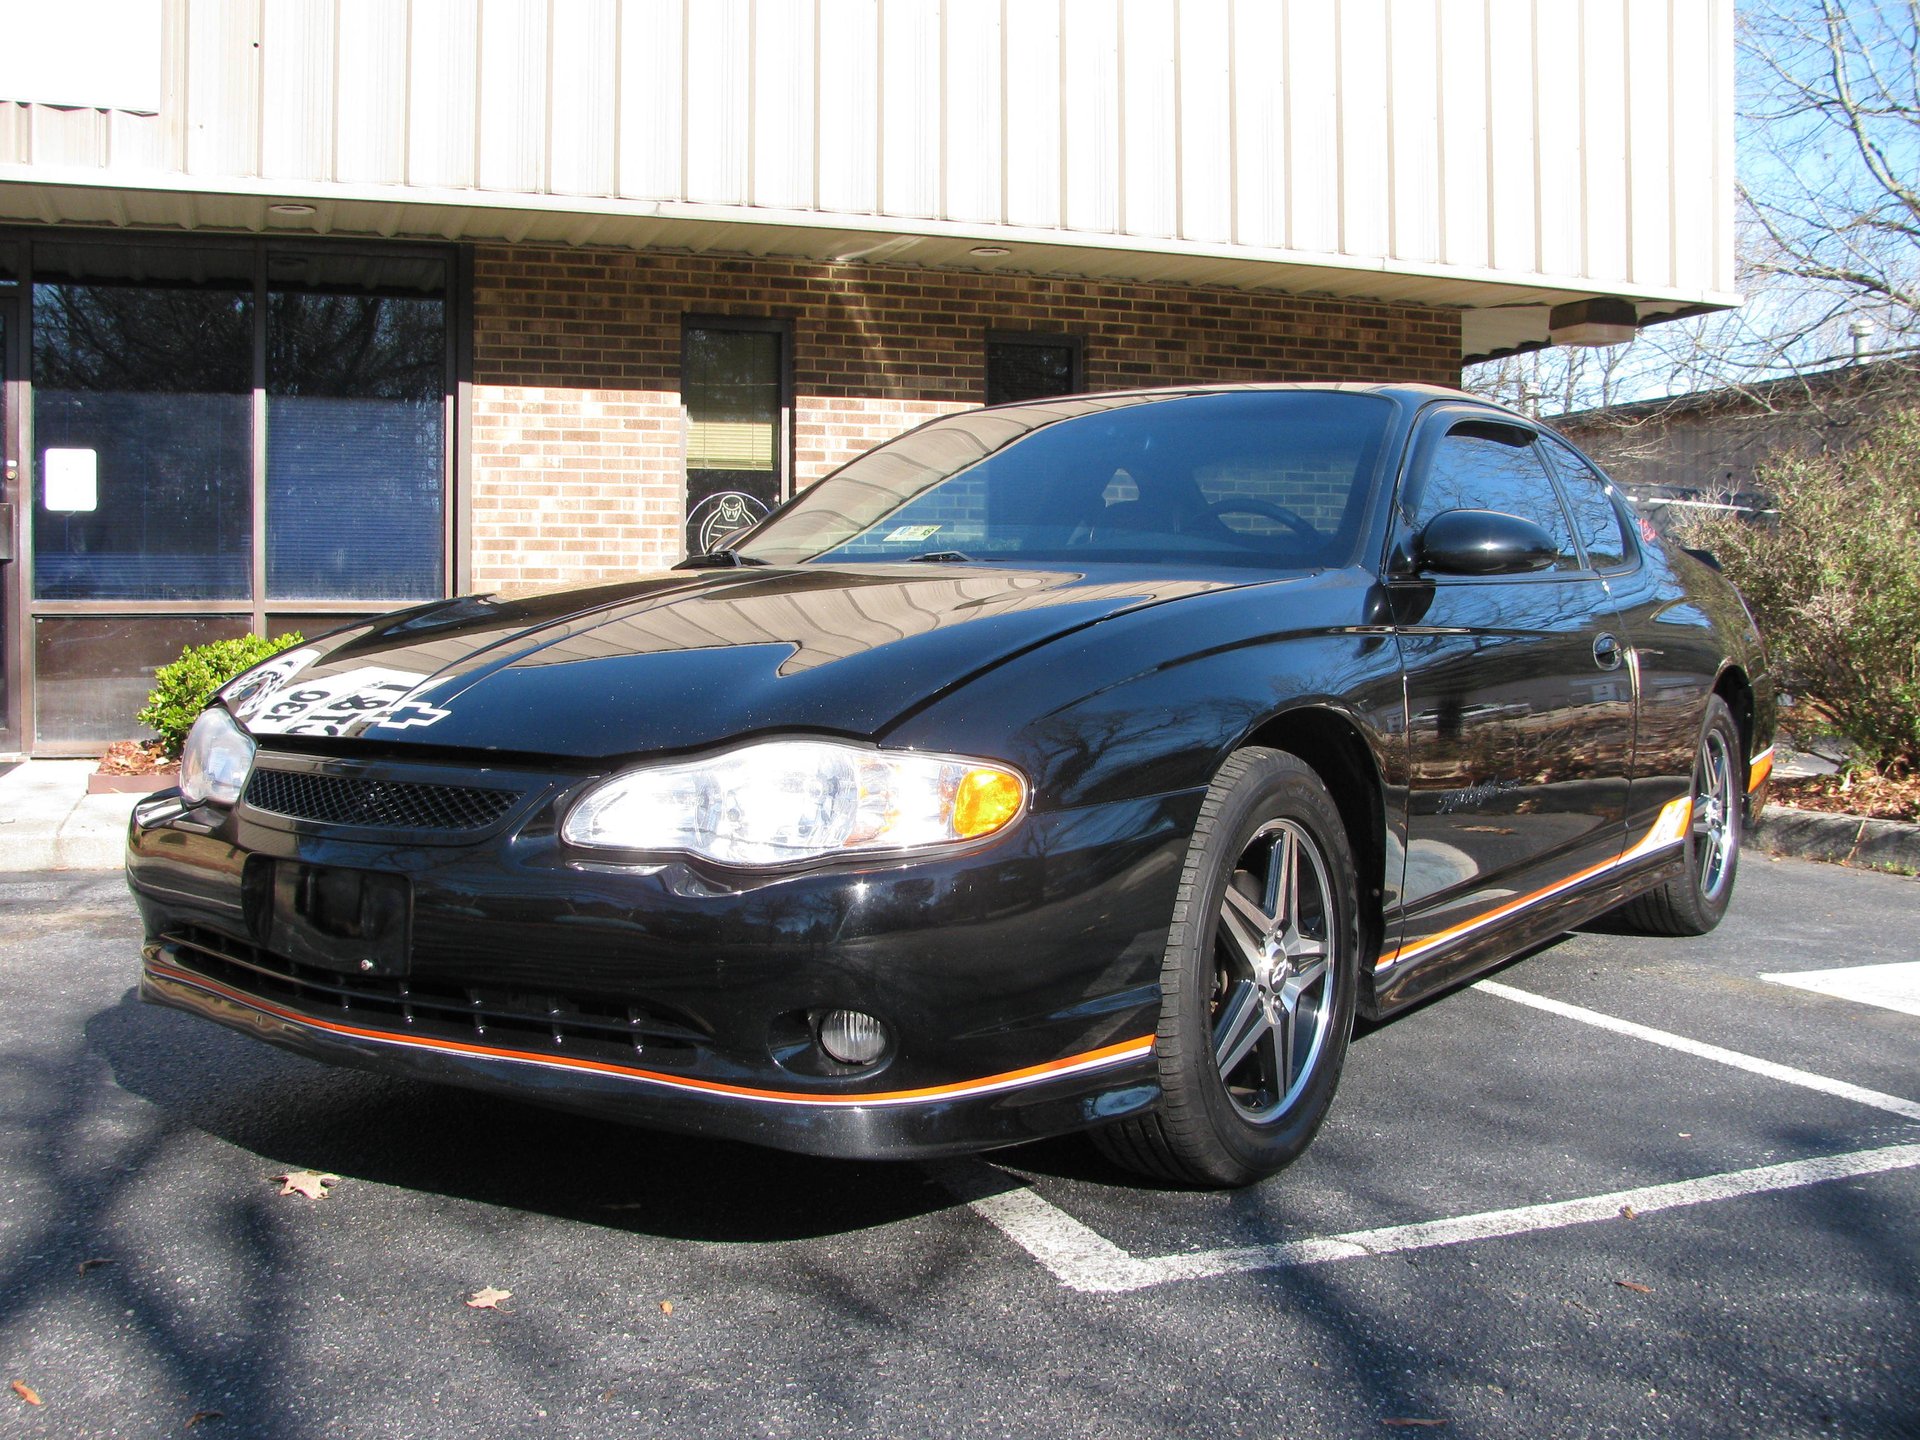 2005 chevrolet monte carlo ss supercharged tony stewart edition